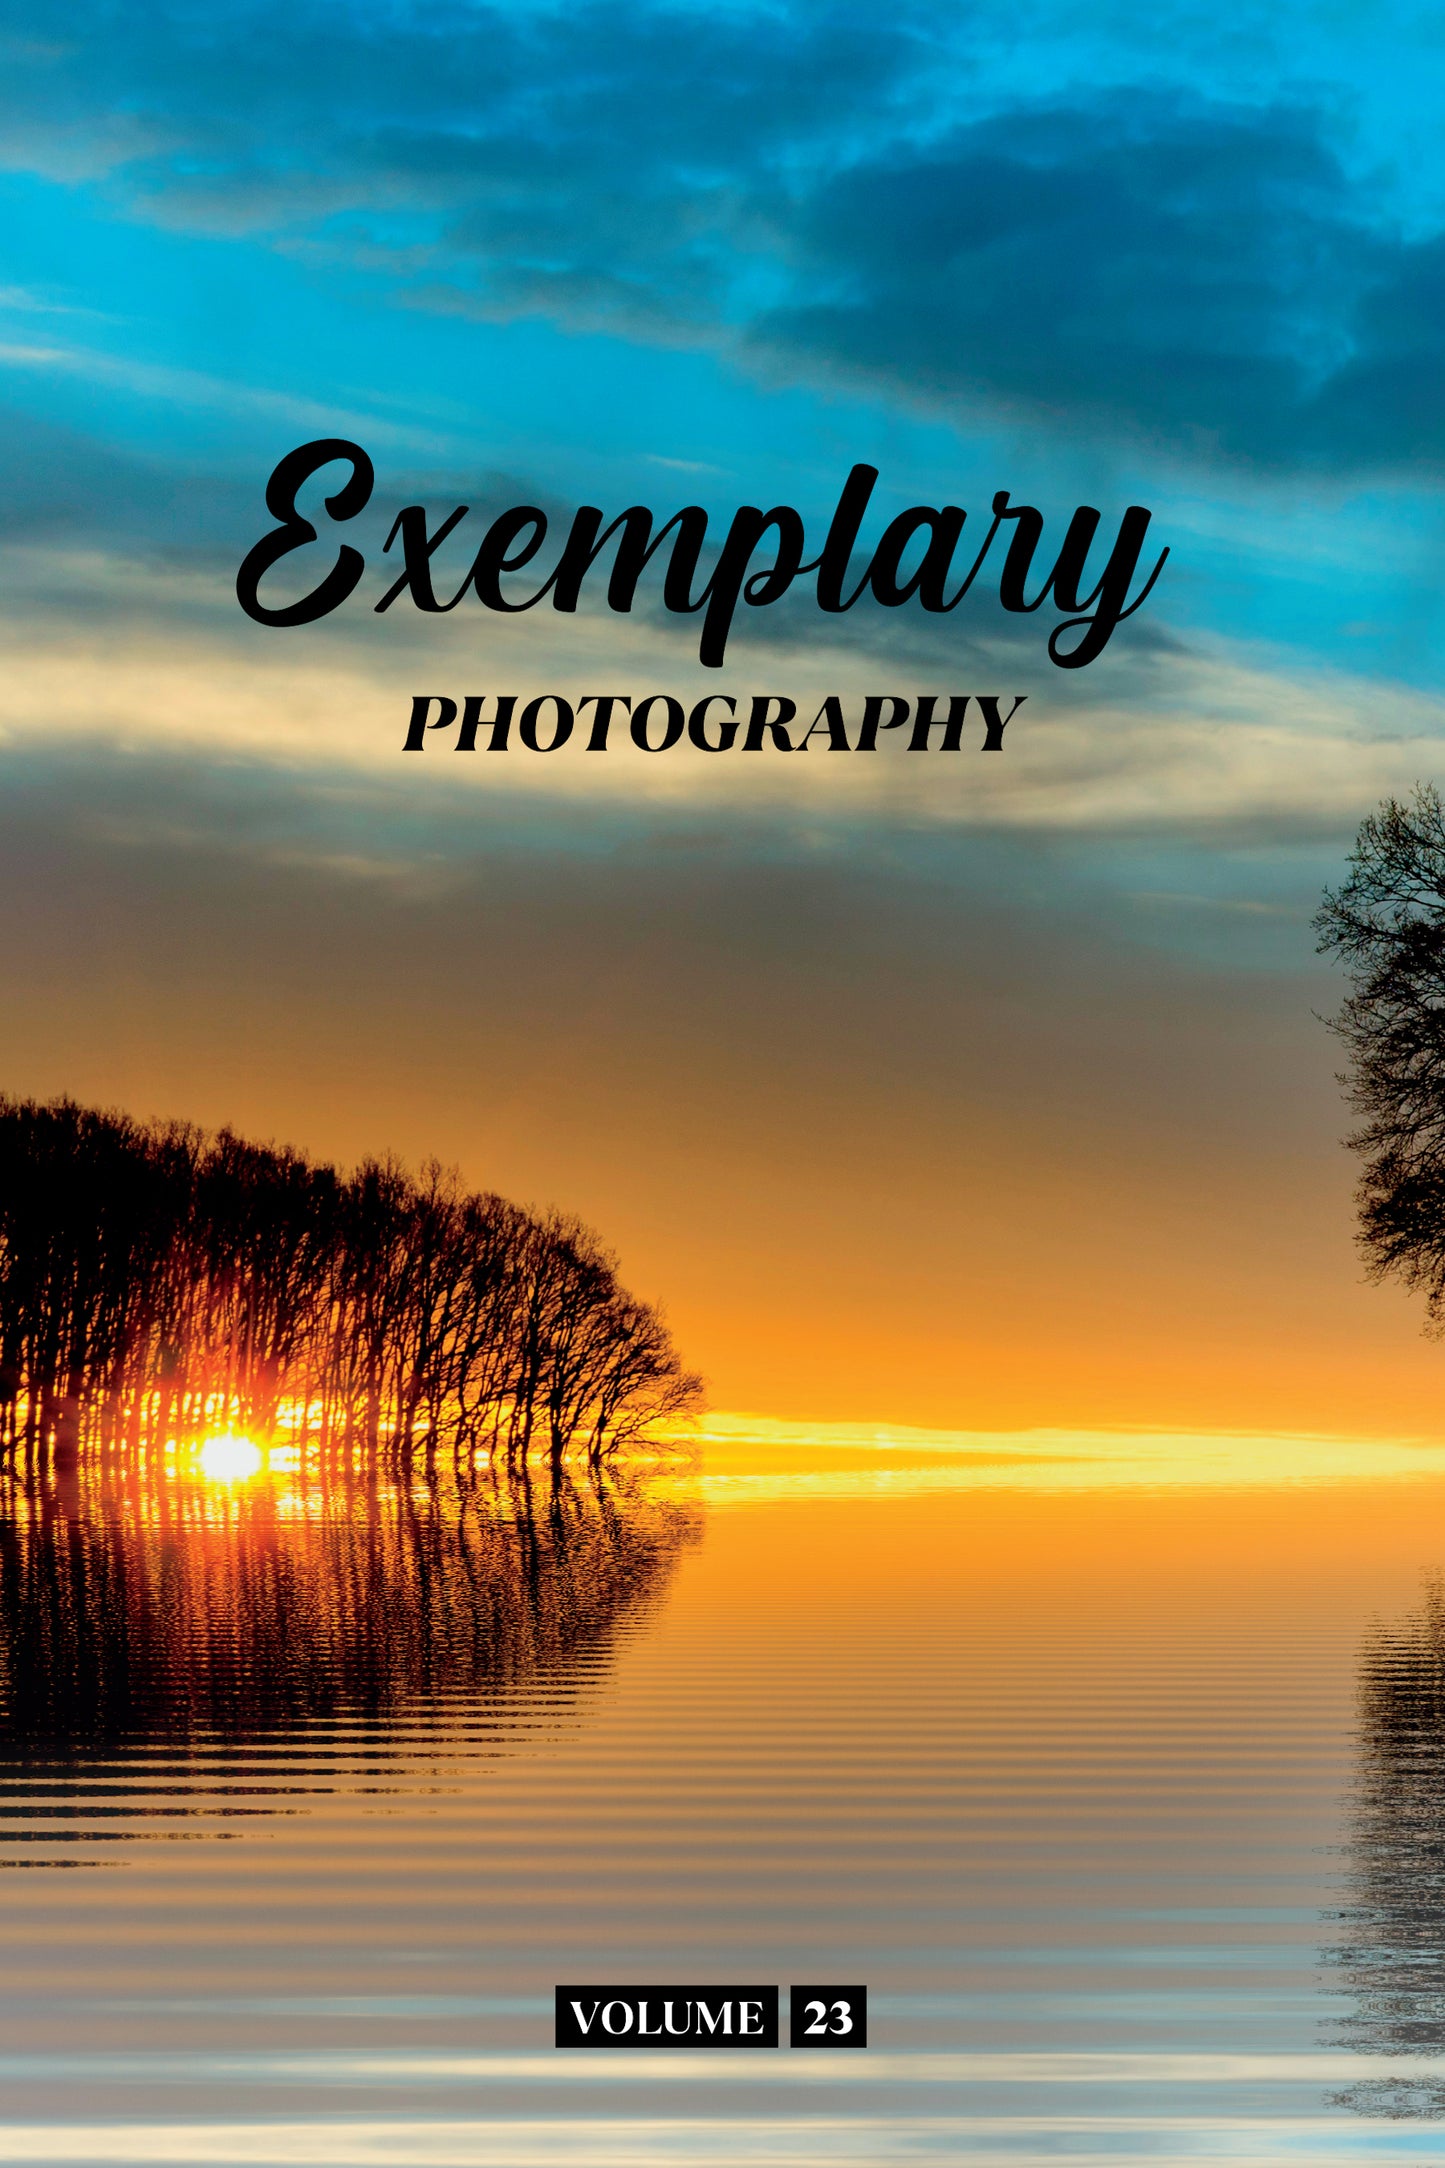 Exemplary Photography Volume 23 (Physical Book Pre-Order)